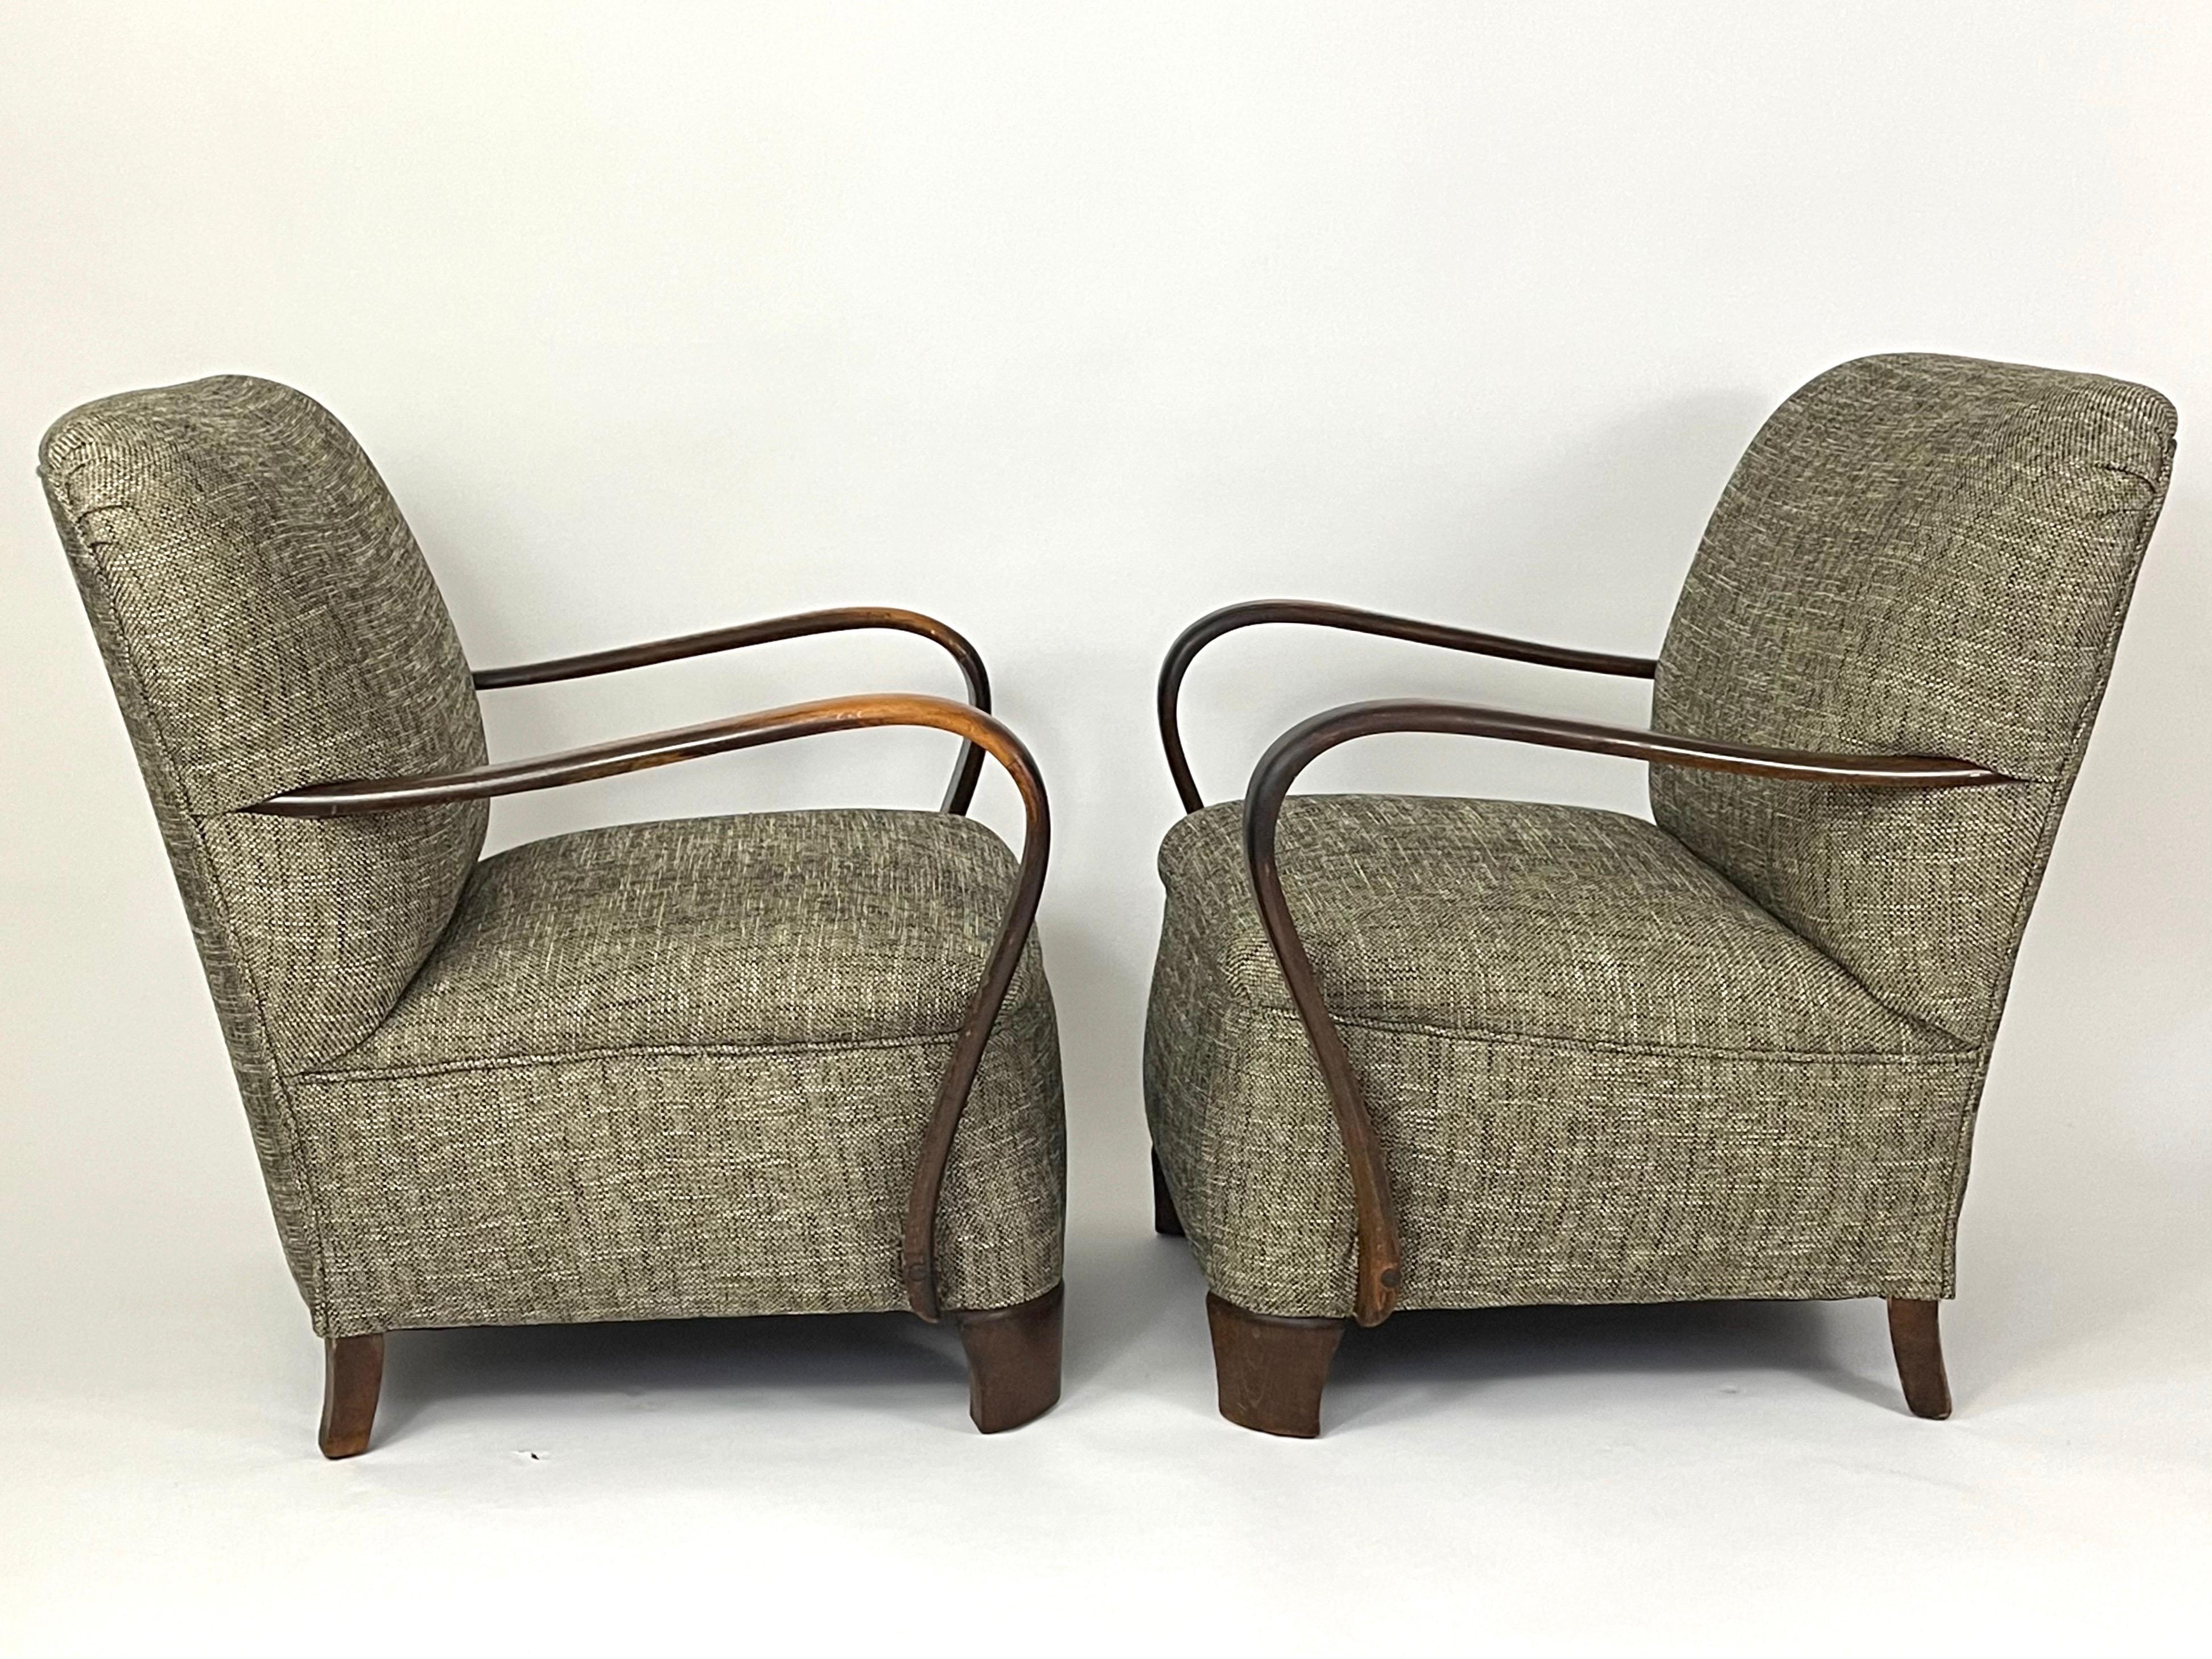 A pair of stylish and very comfortable bentwood lounge chairs, American, circa 1940s.
Newly restored and reupholstered, these chairs are roomy, inviting and wonderfully sculptural. With internal springs, these chairs sit well and are very easy to